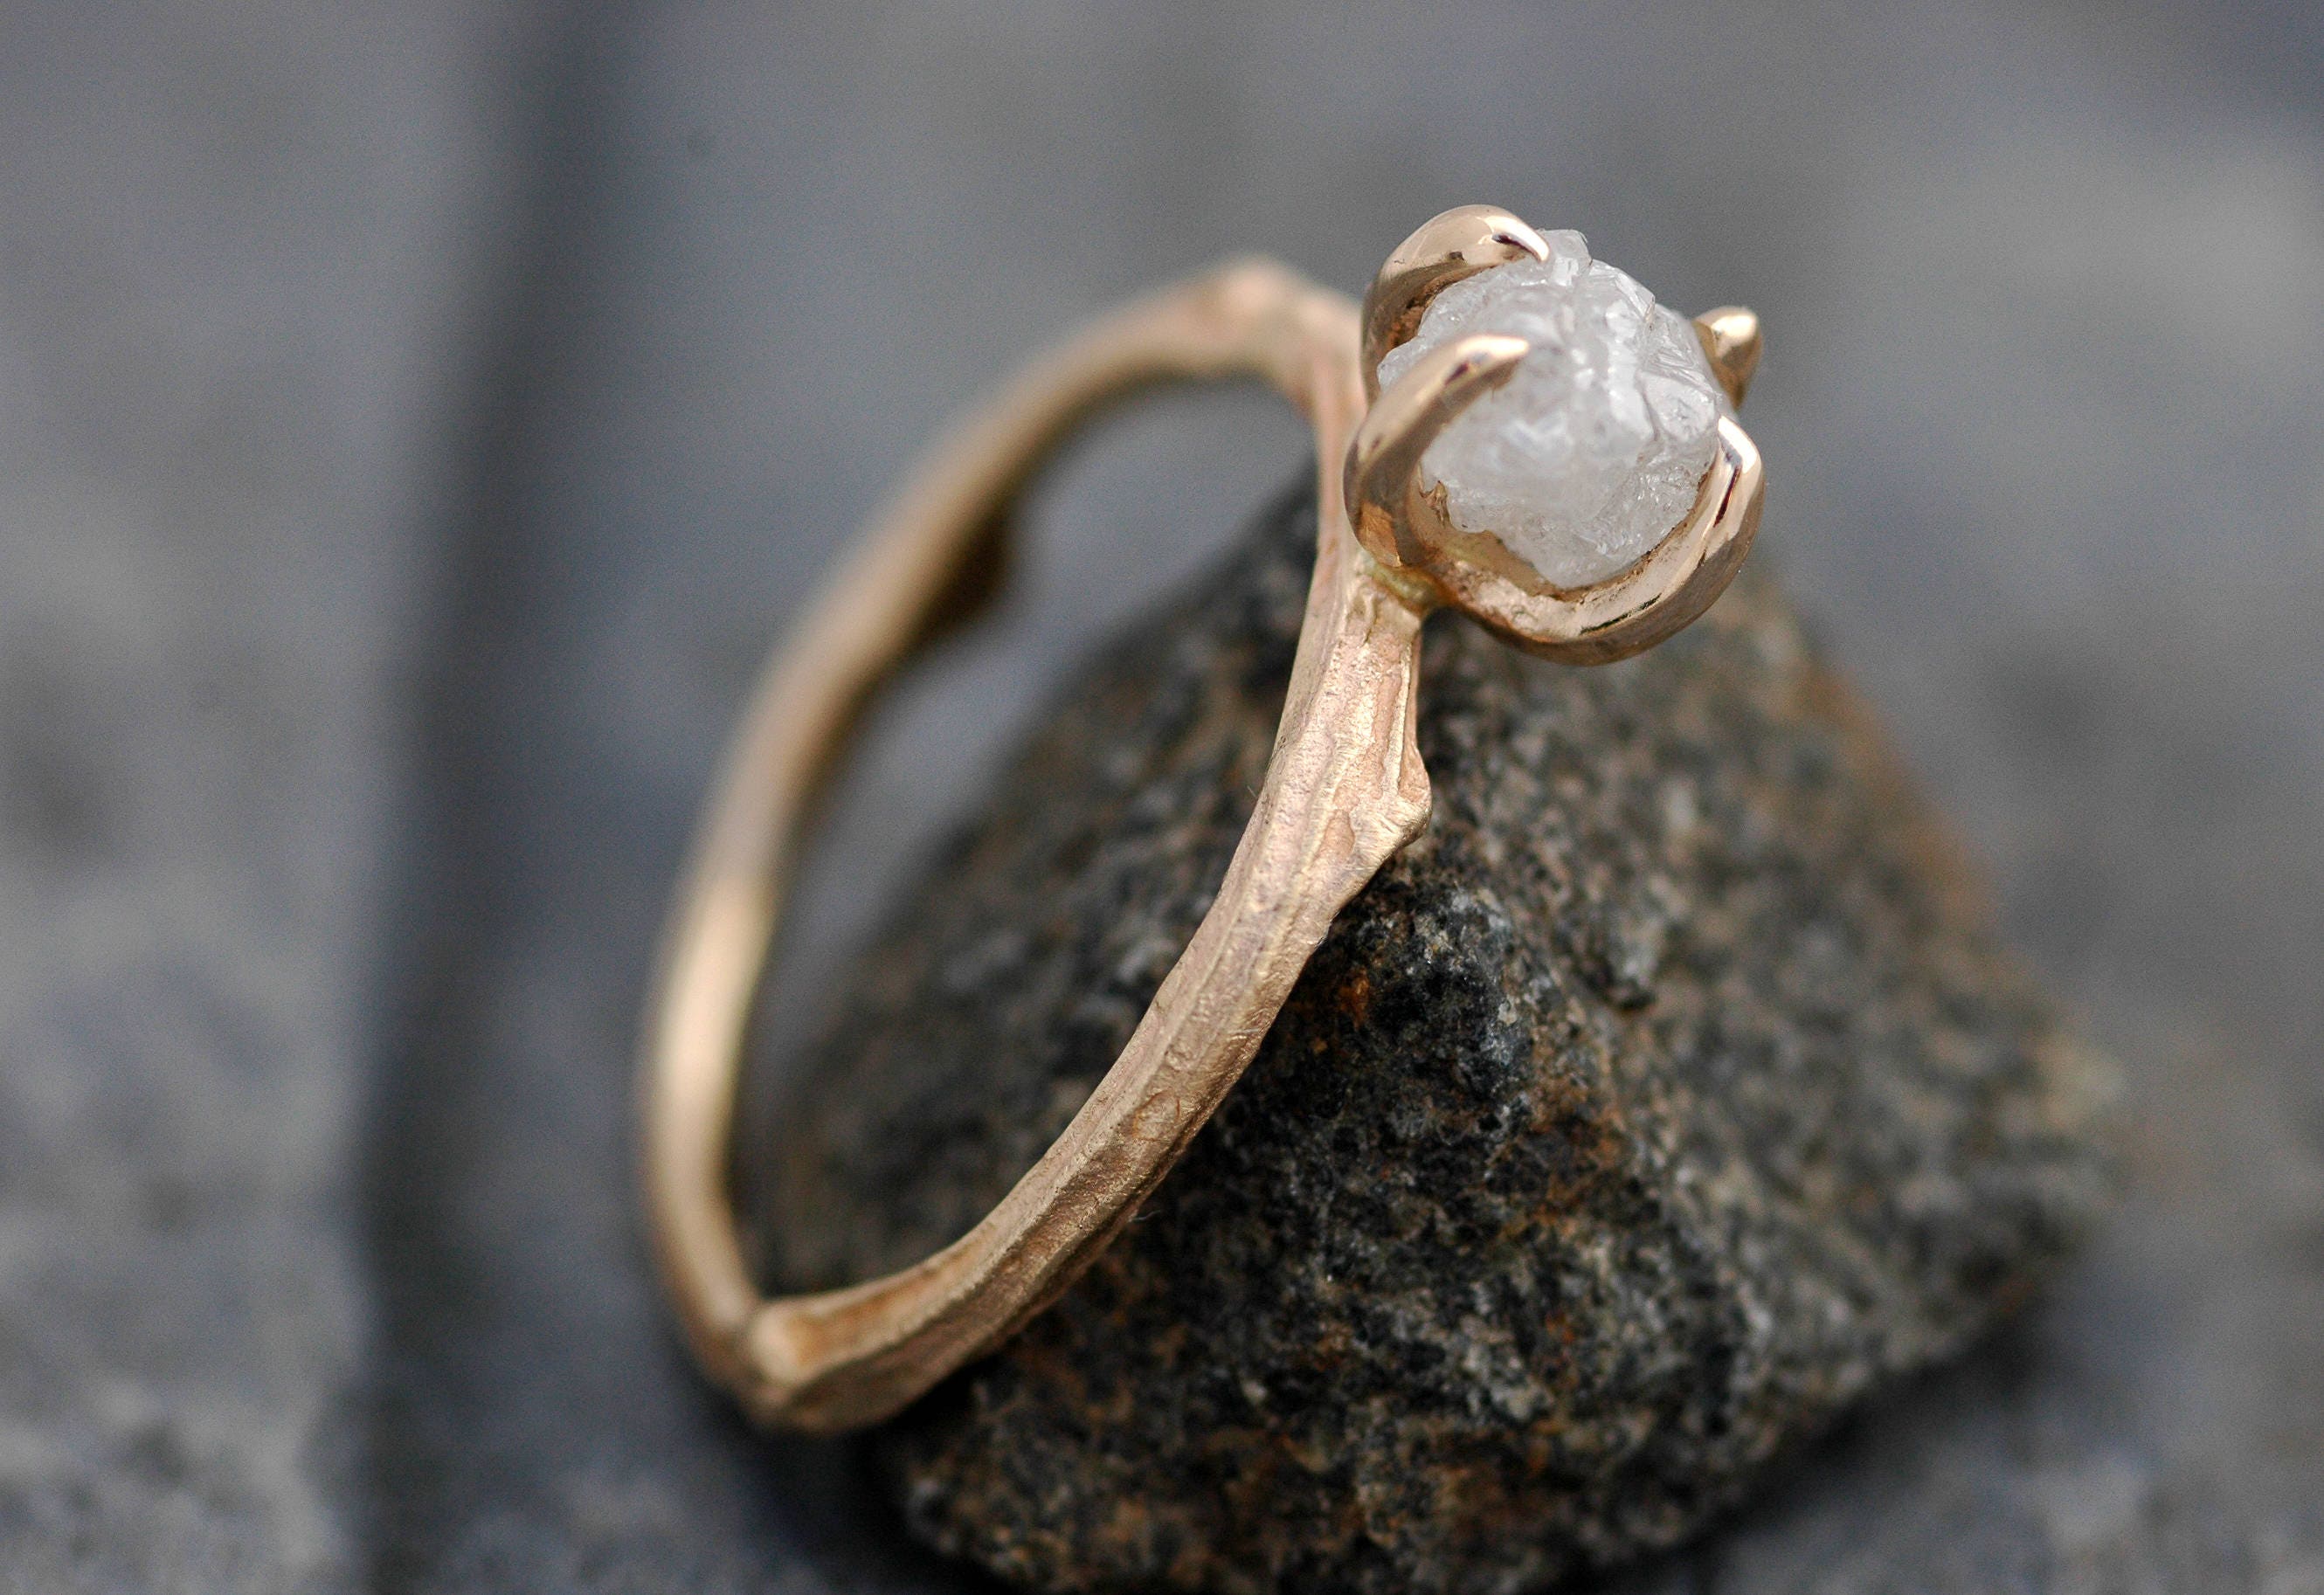 Dawn Vertrees Raw Uncut Rough Engagement Wedding Rings: Natural Raw  Morganite Twig Engagement Ring in 14k Gold, Hand-made Tree Branch Ring -  Anniversary Ring- DV Jewelry Designs